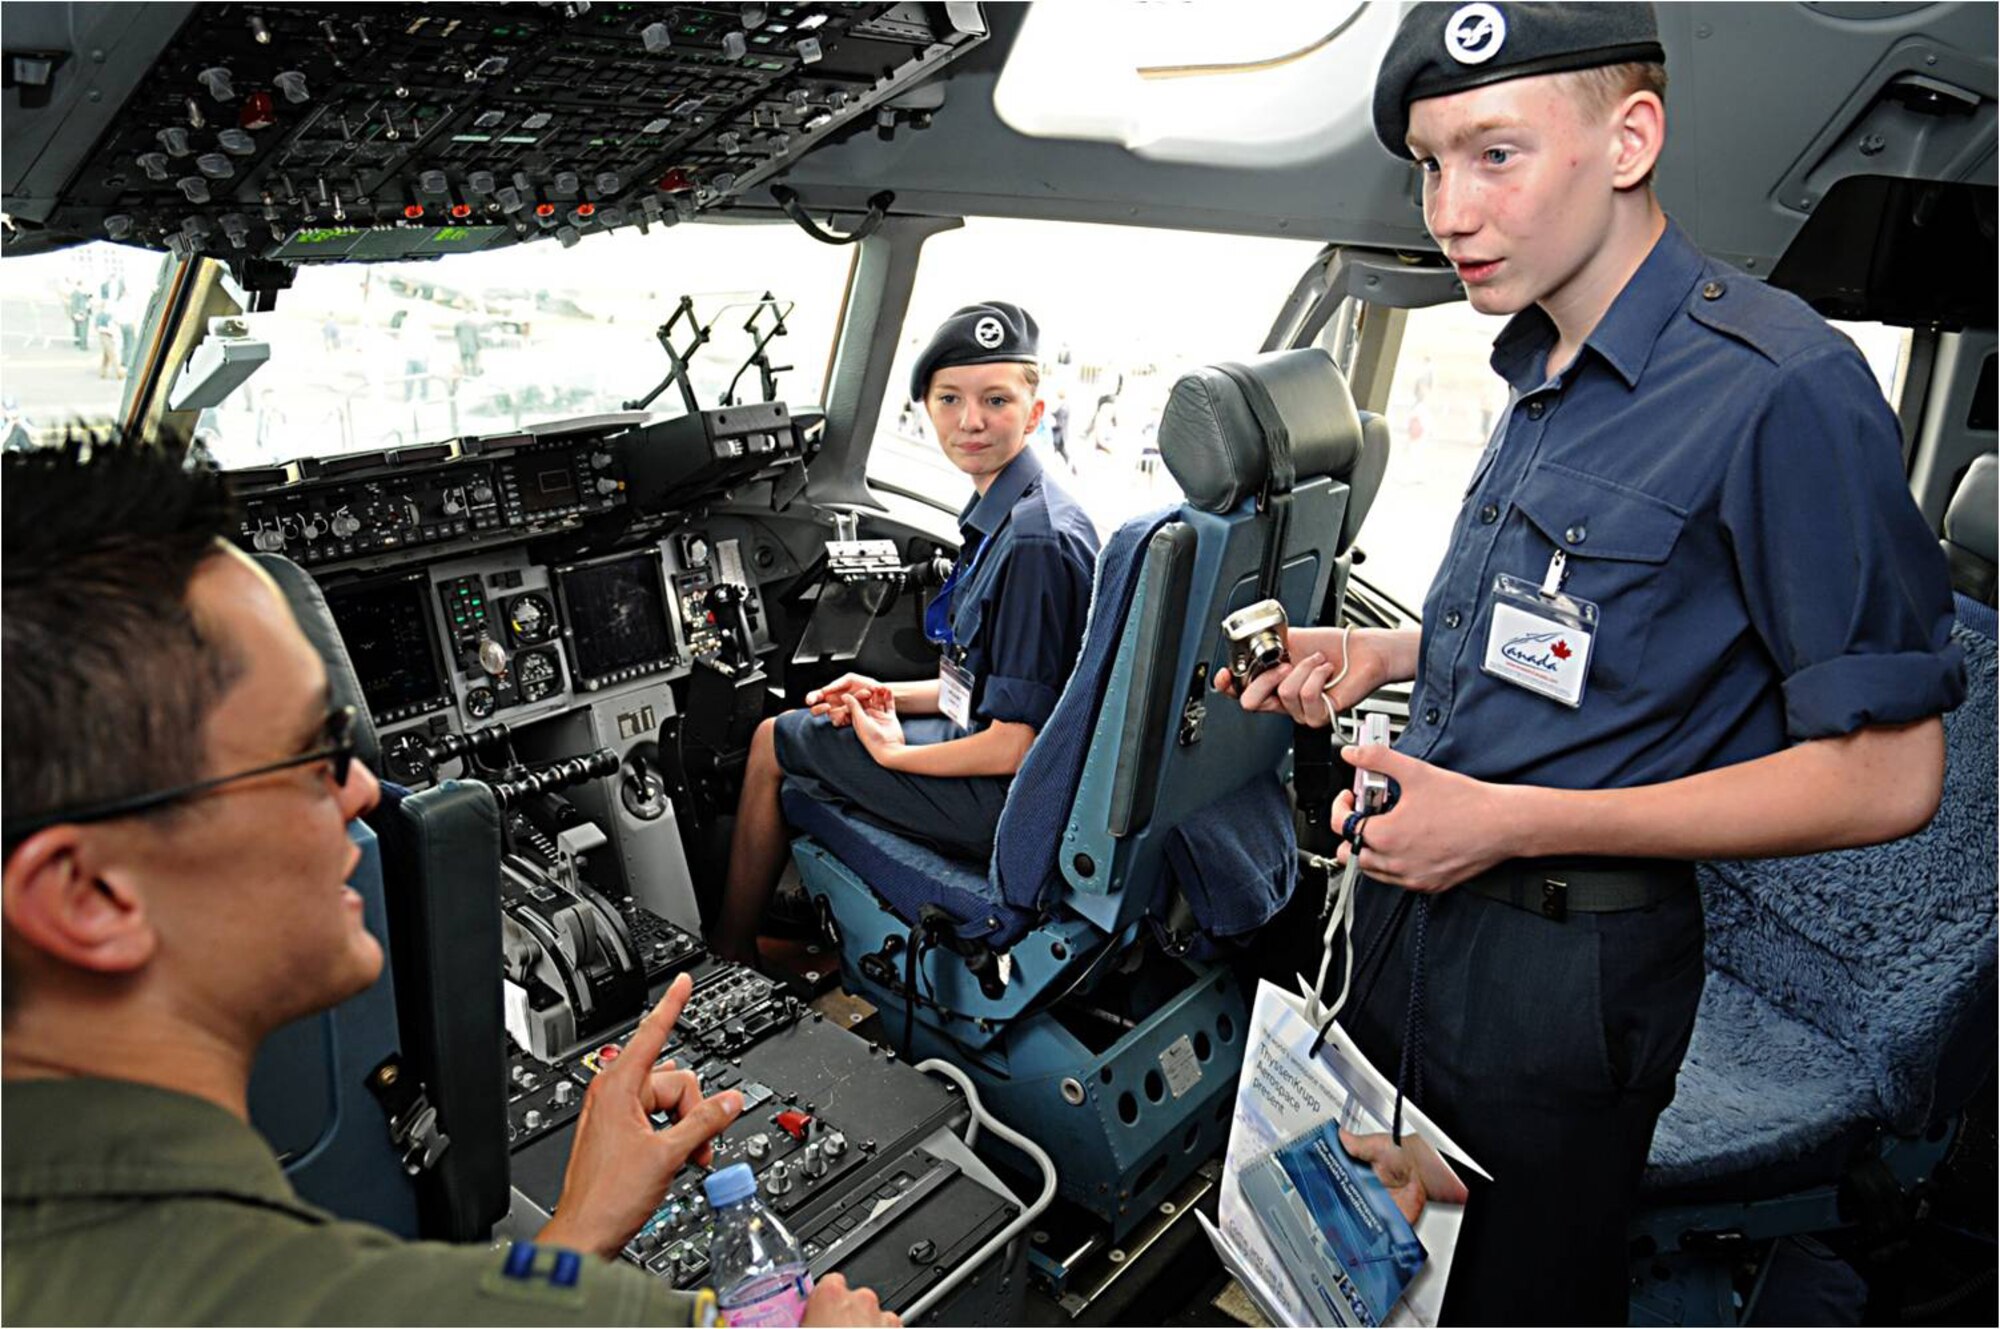 FARNBOROUGH, United Kingdom -- Capt. Gordon Roman, C-17 Globemaster pilot from Travis Air Force Base, Calif., explains cockpit controls to British cadets here July 20.  Eleven U.S. aircraft and approximately 70 military personnel representing all branches of service participate in the 2010 Farnborough International Air Show that takes place July 19-25. (U.S. Air Force photo/Staff Sgt. Jerry Fleshman)

